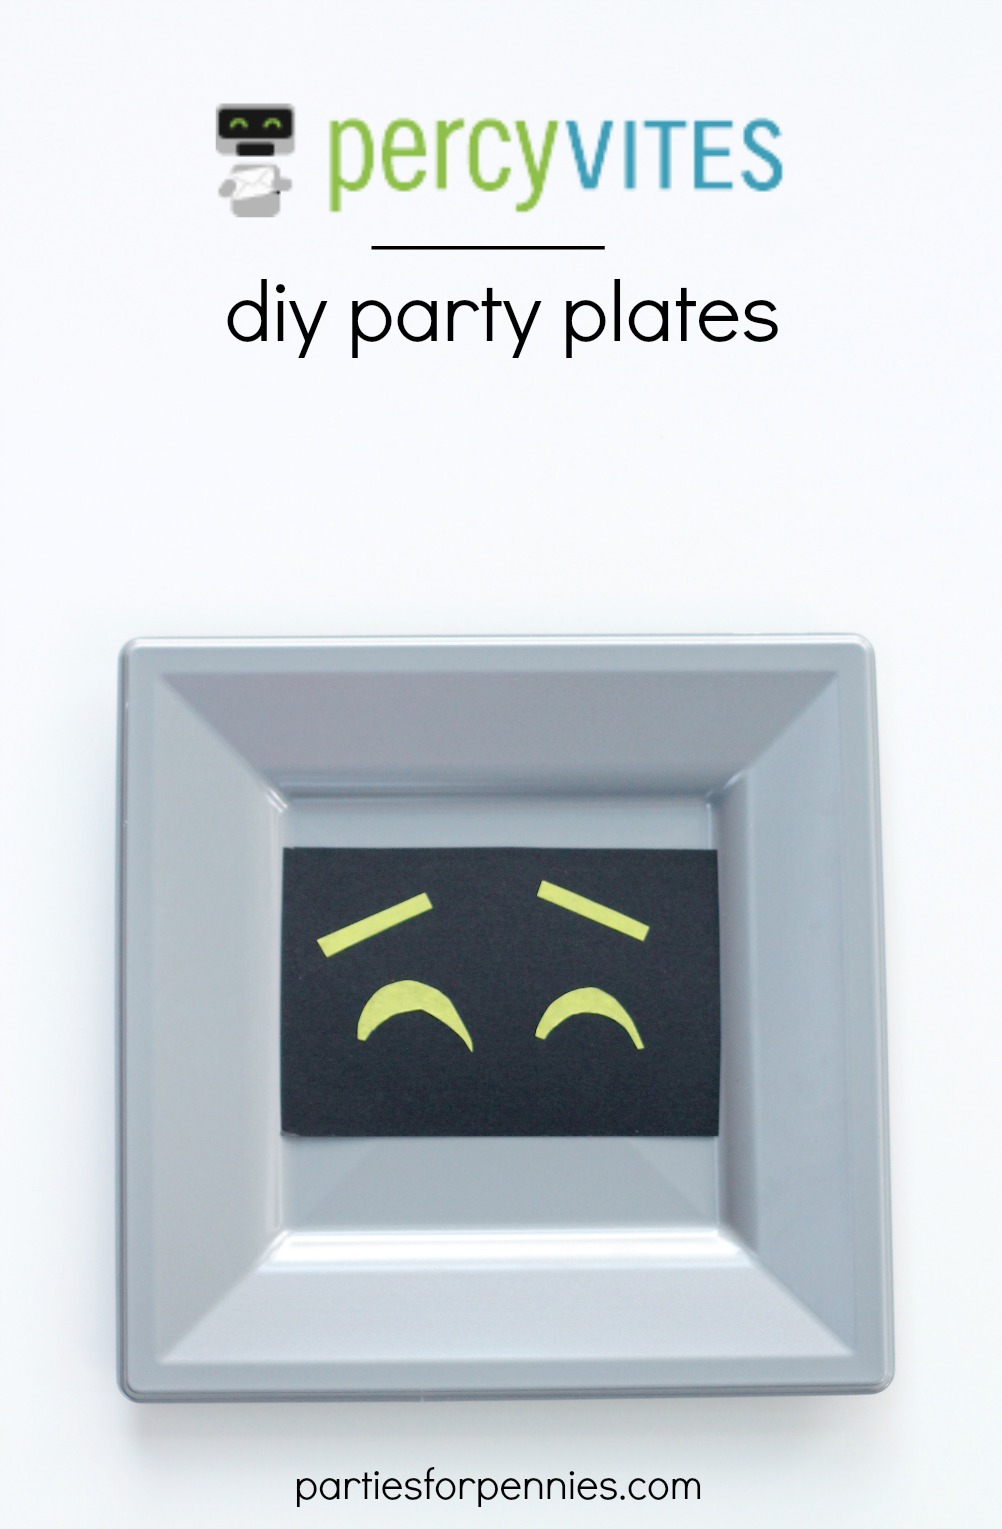 PercyVites - DIY Robot Party Plates by PartiesforPennies.com